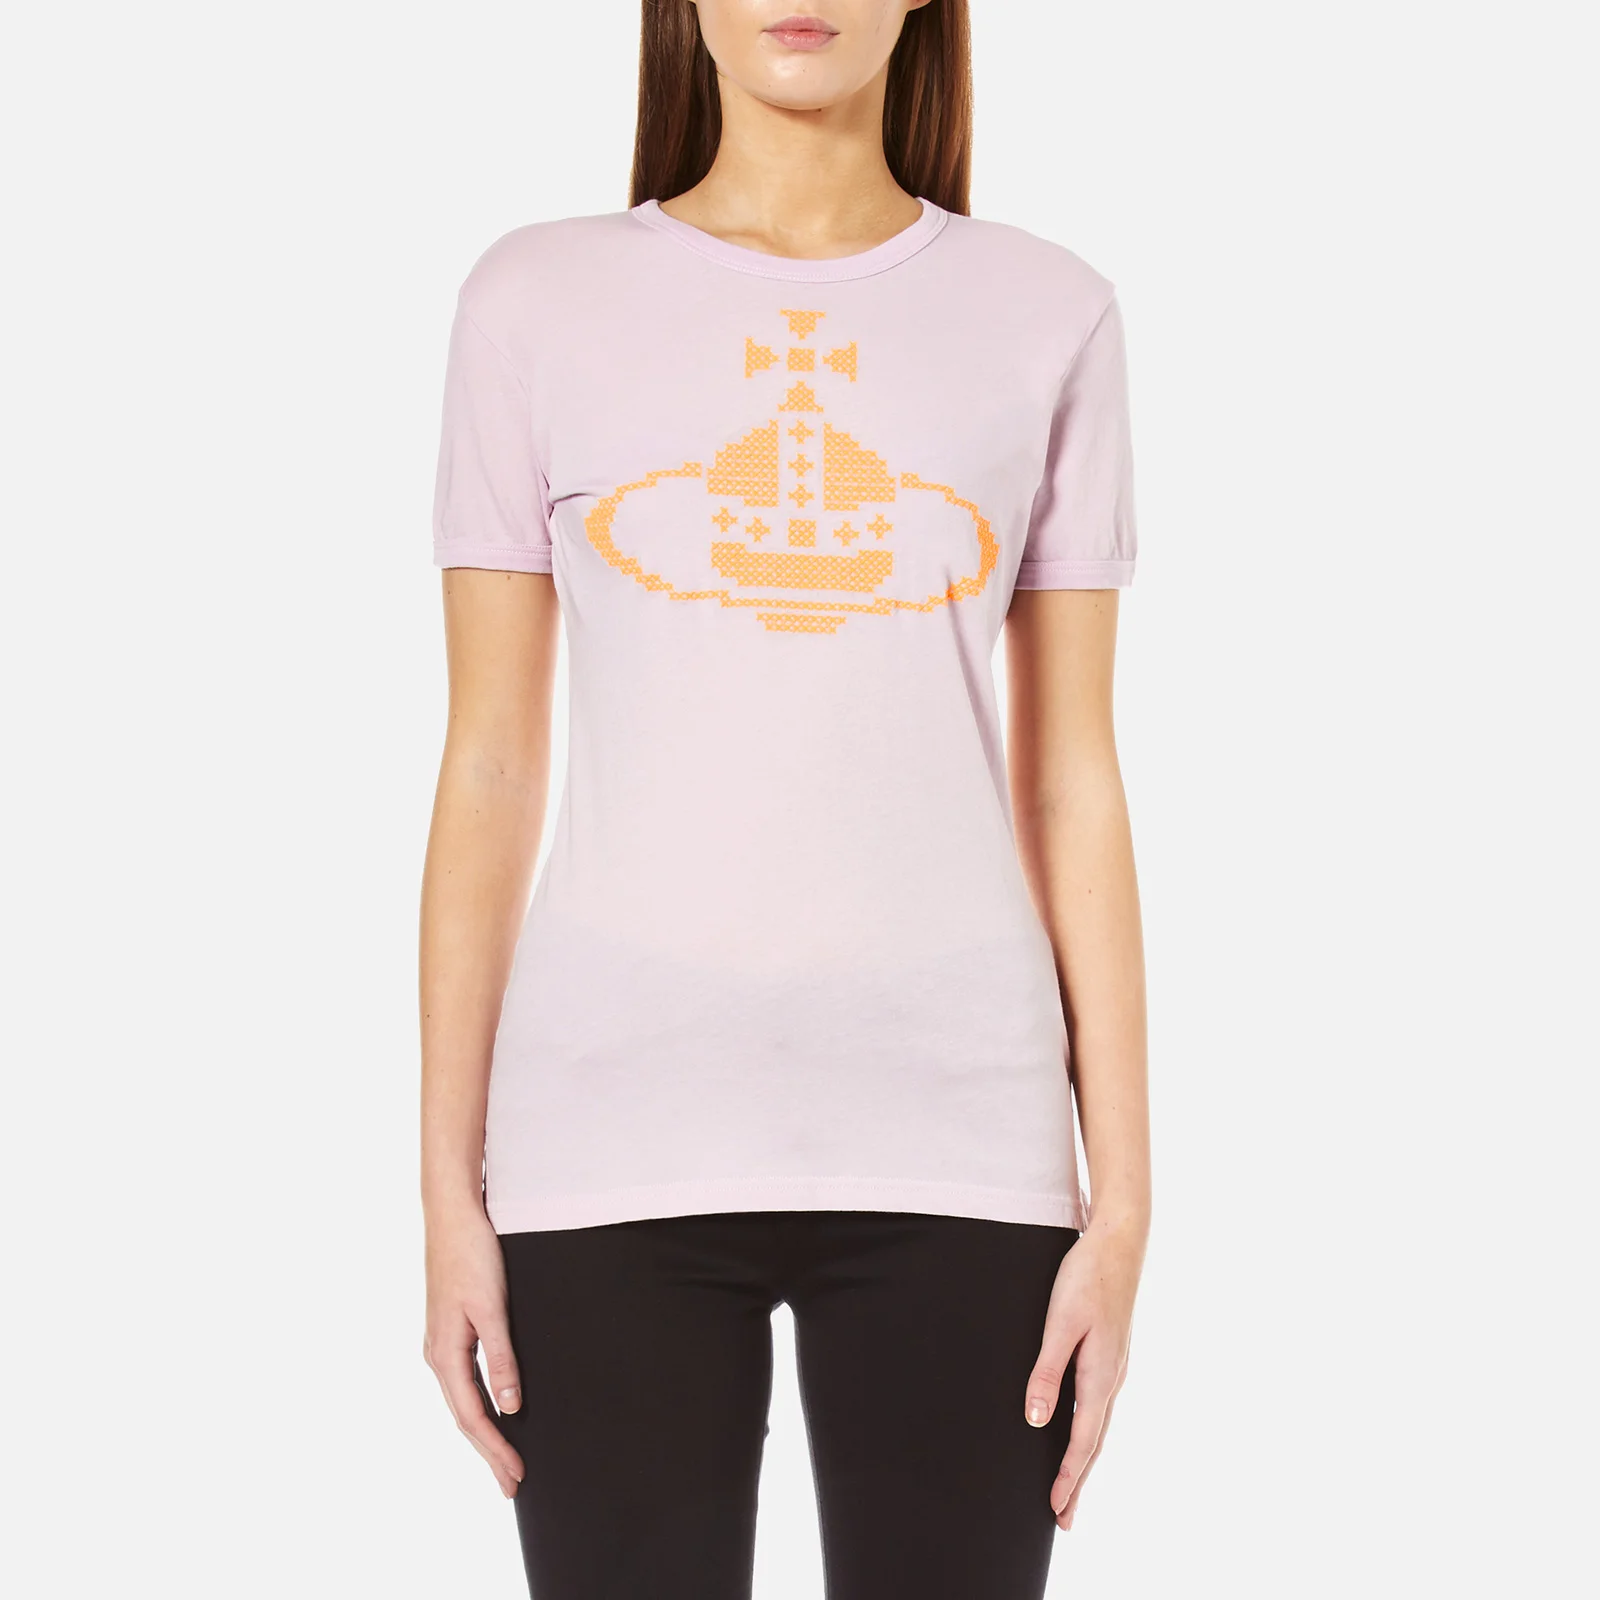 Vivienne Westwood Anglomania Women's Embroidered Orb T-Shirt - Lilac Image 1